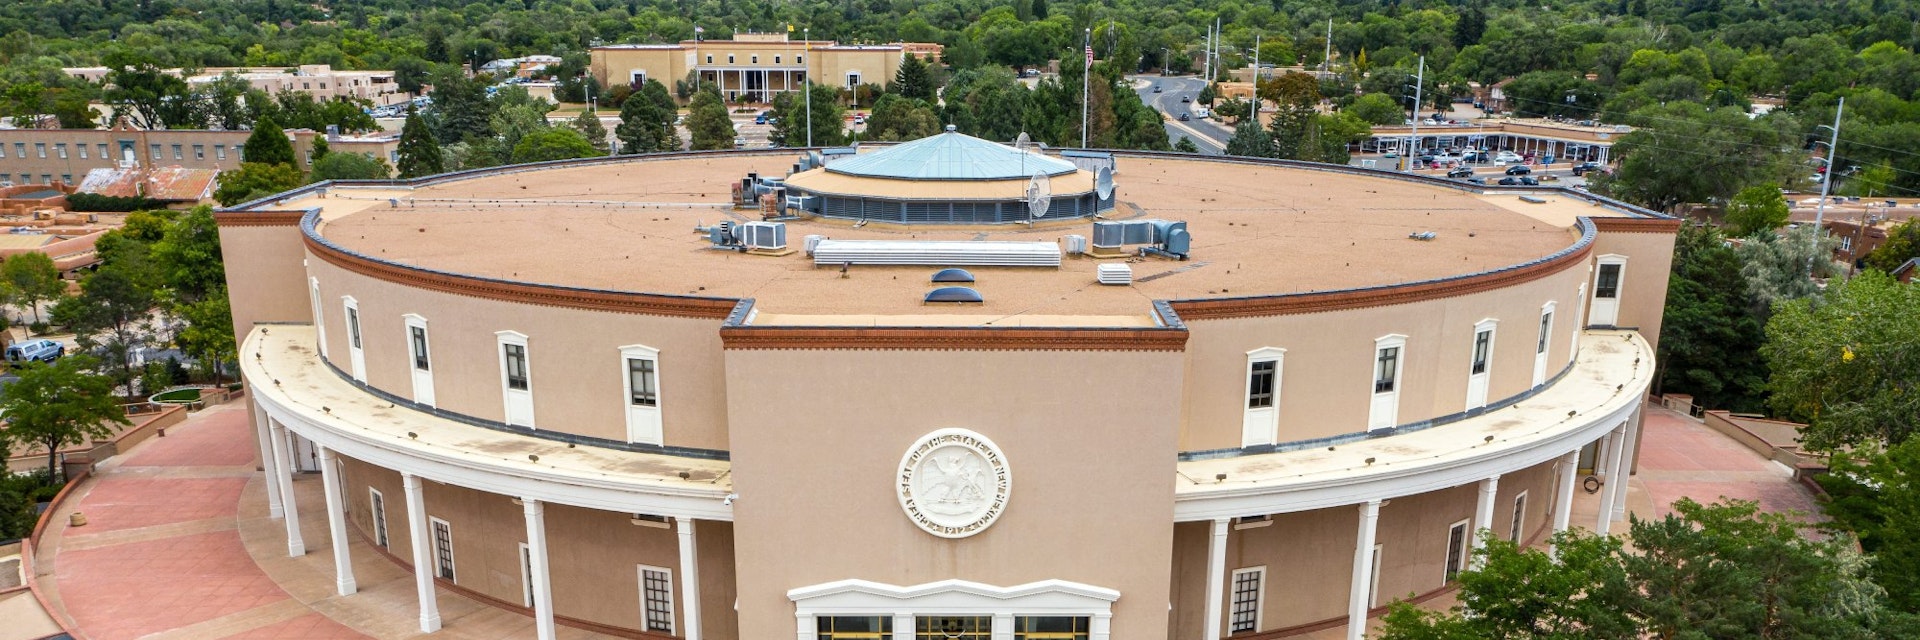 New Mexico State Capitol Building The Roundhouse in Santa Fe NM USA